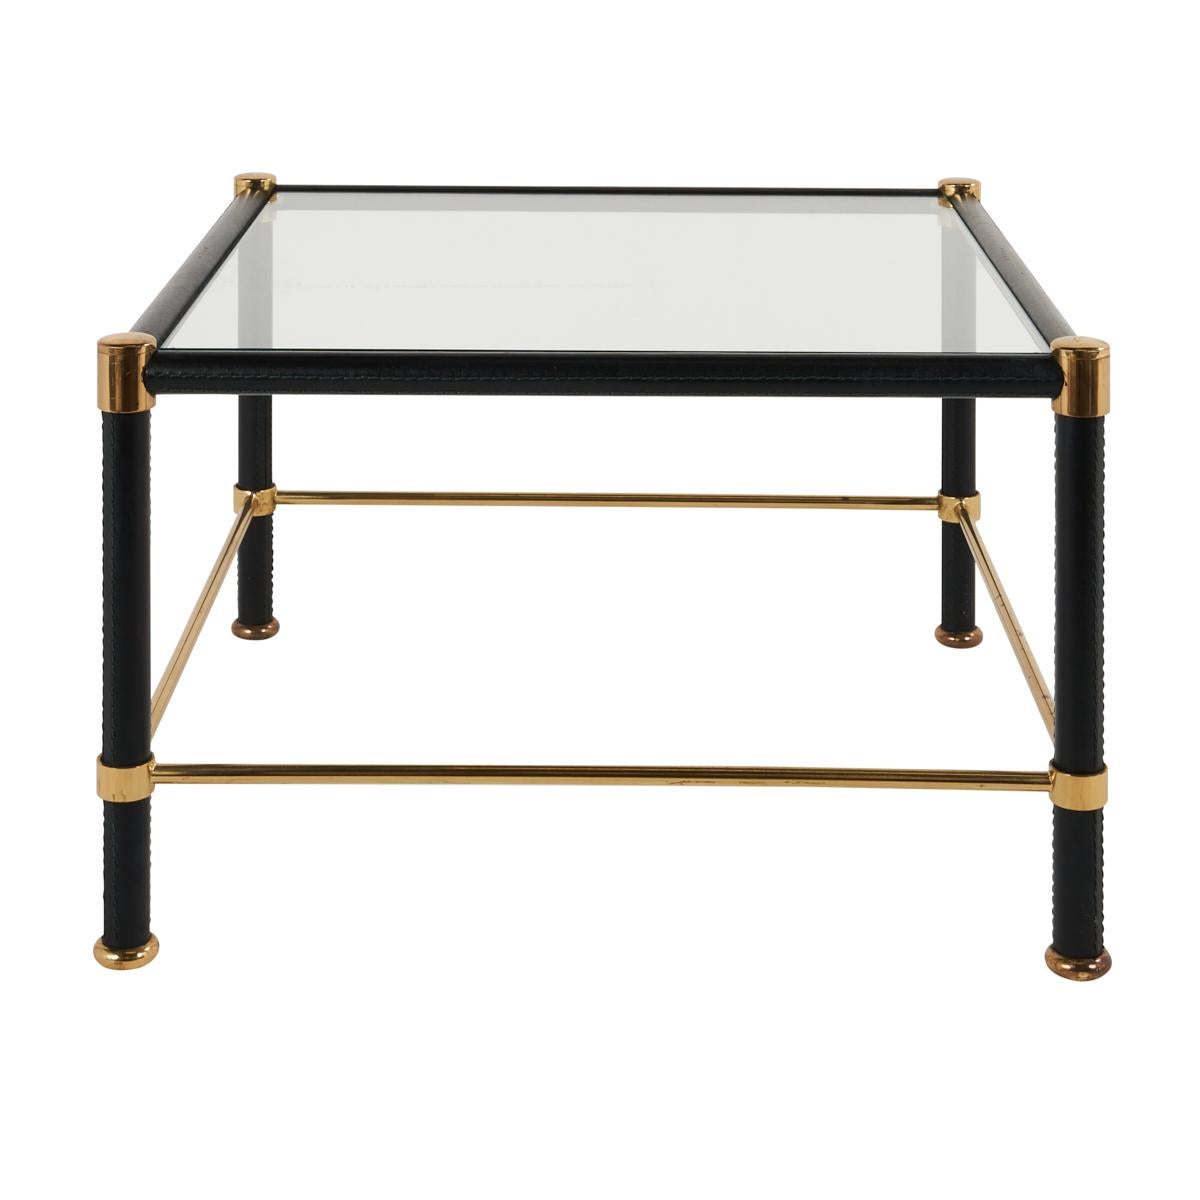 These handsome French glass-top side tables are wrapped in leather with green stitching and brass accents, in the style of Jacques Adnet. Wonderfully lithe, infinitely versatile and ever chic, this two-piece set adds sophistication and luxury to